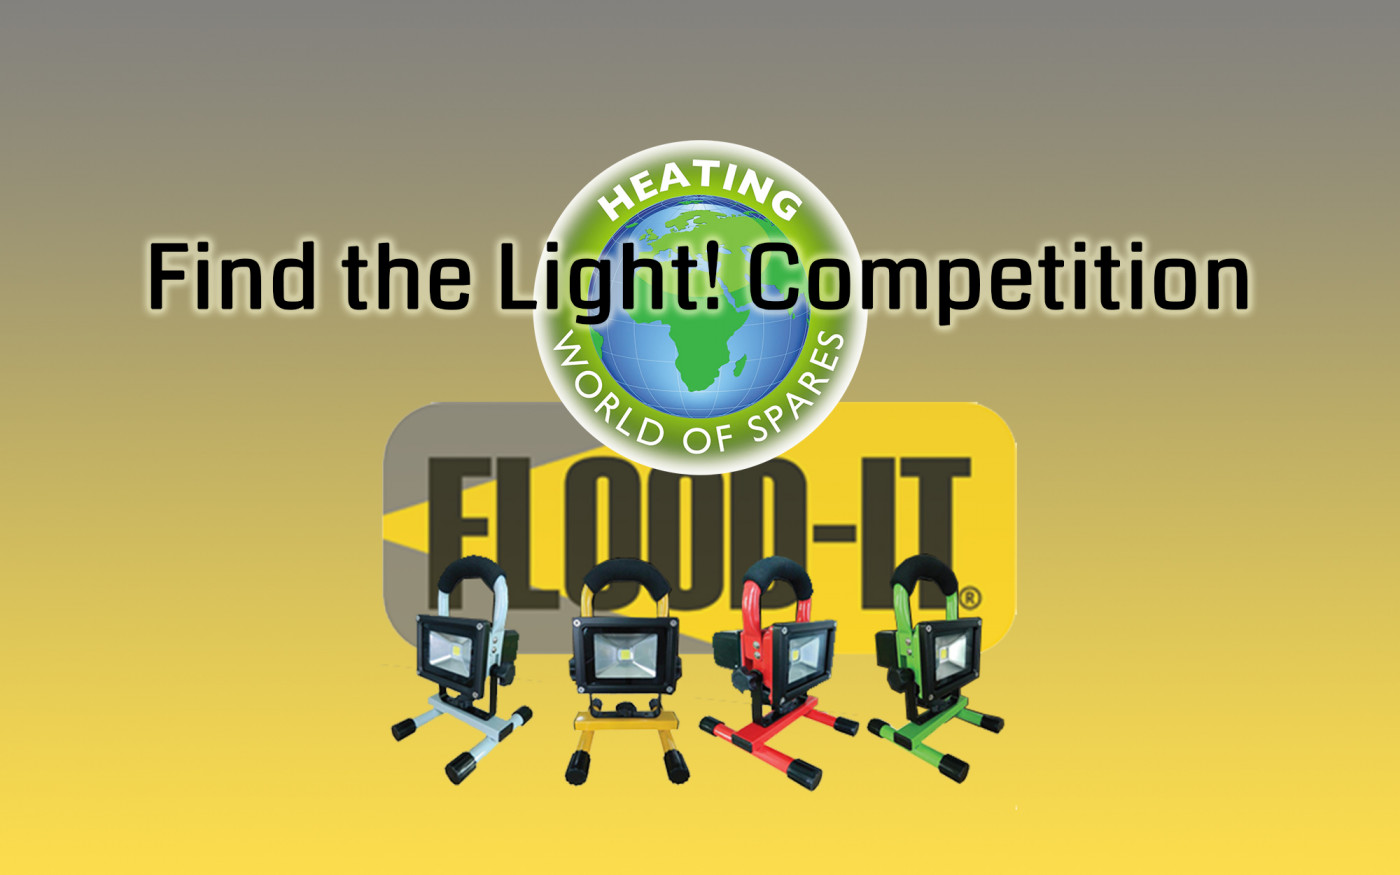 Win a Flood-It Light and Magnetic Feet!